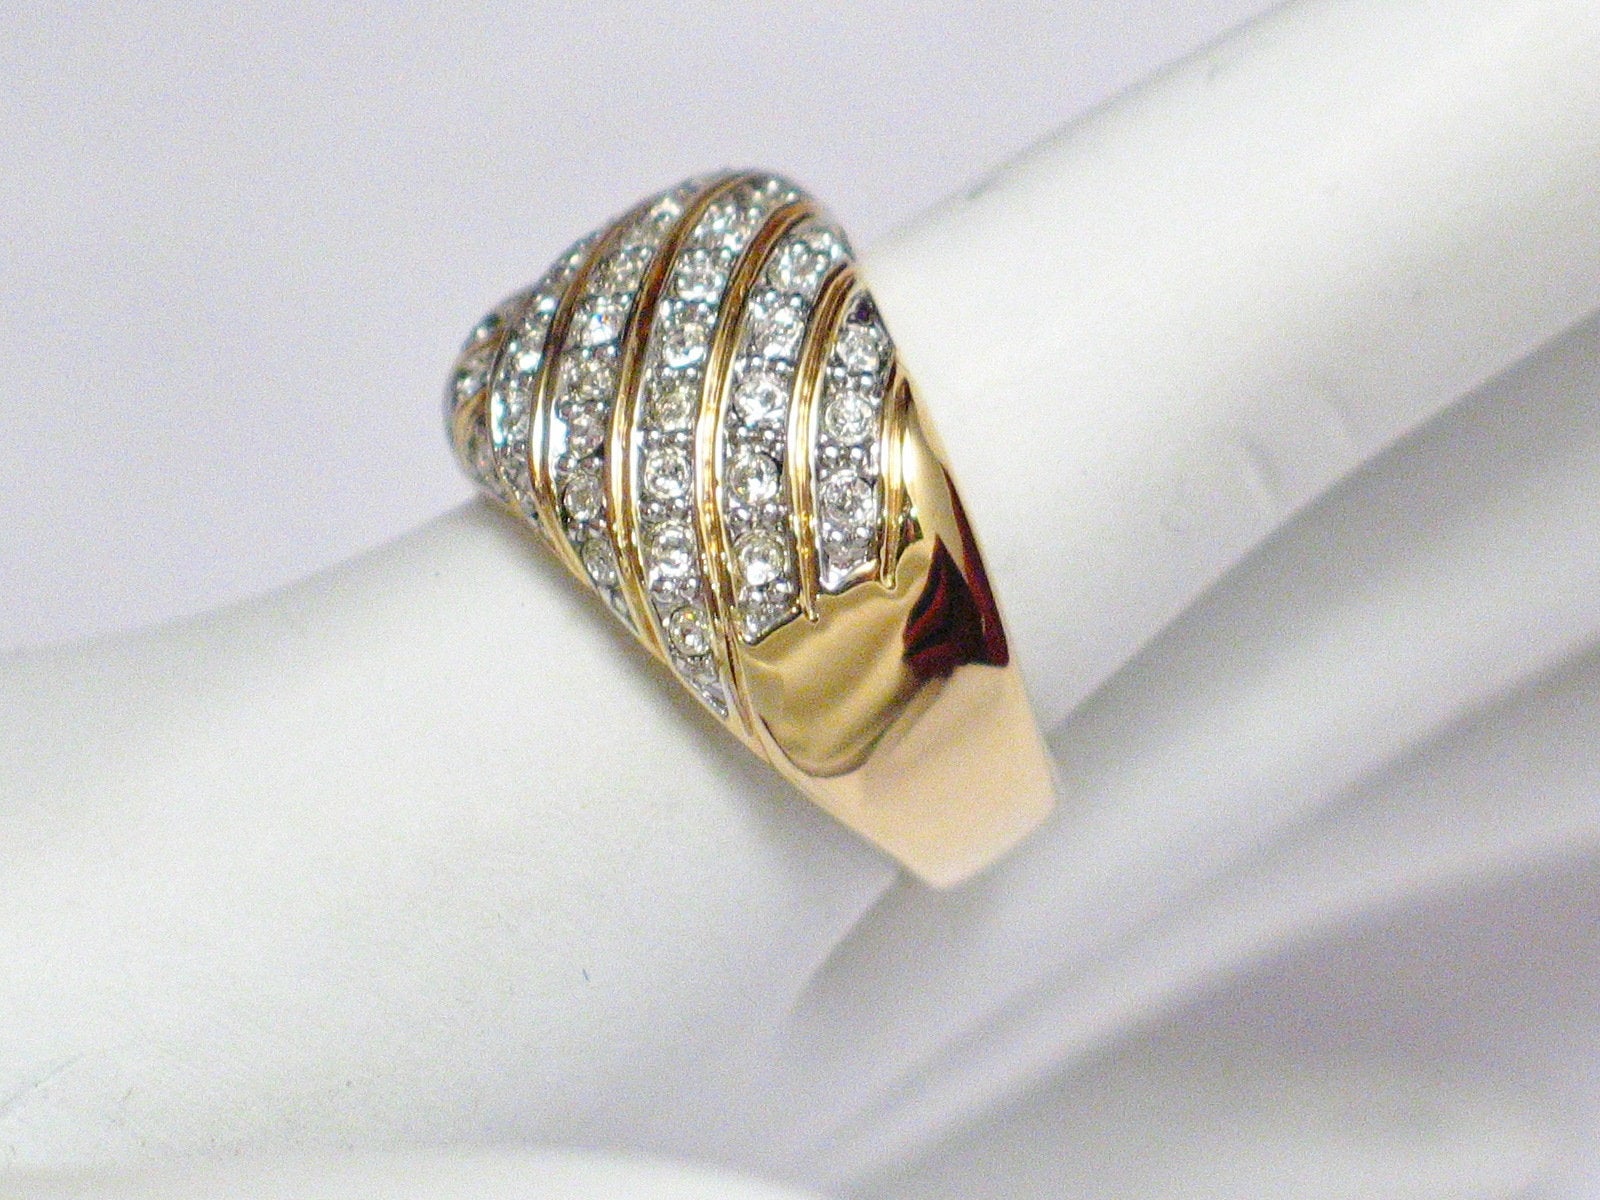 Womens Ring, Gold Rhinestone Design Wide Band Fashion Ring sz7 - Estate Jewelry | Blingschlingers online